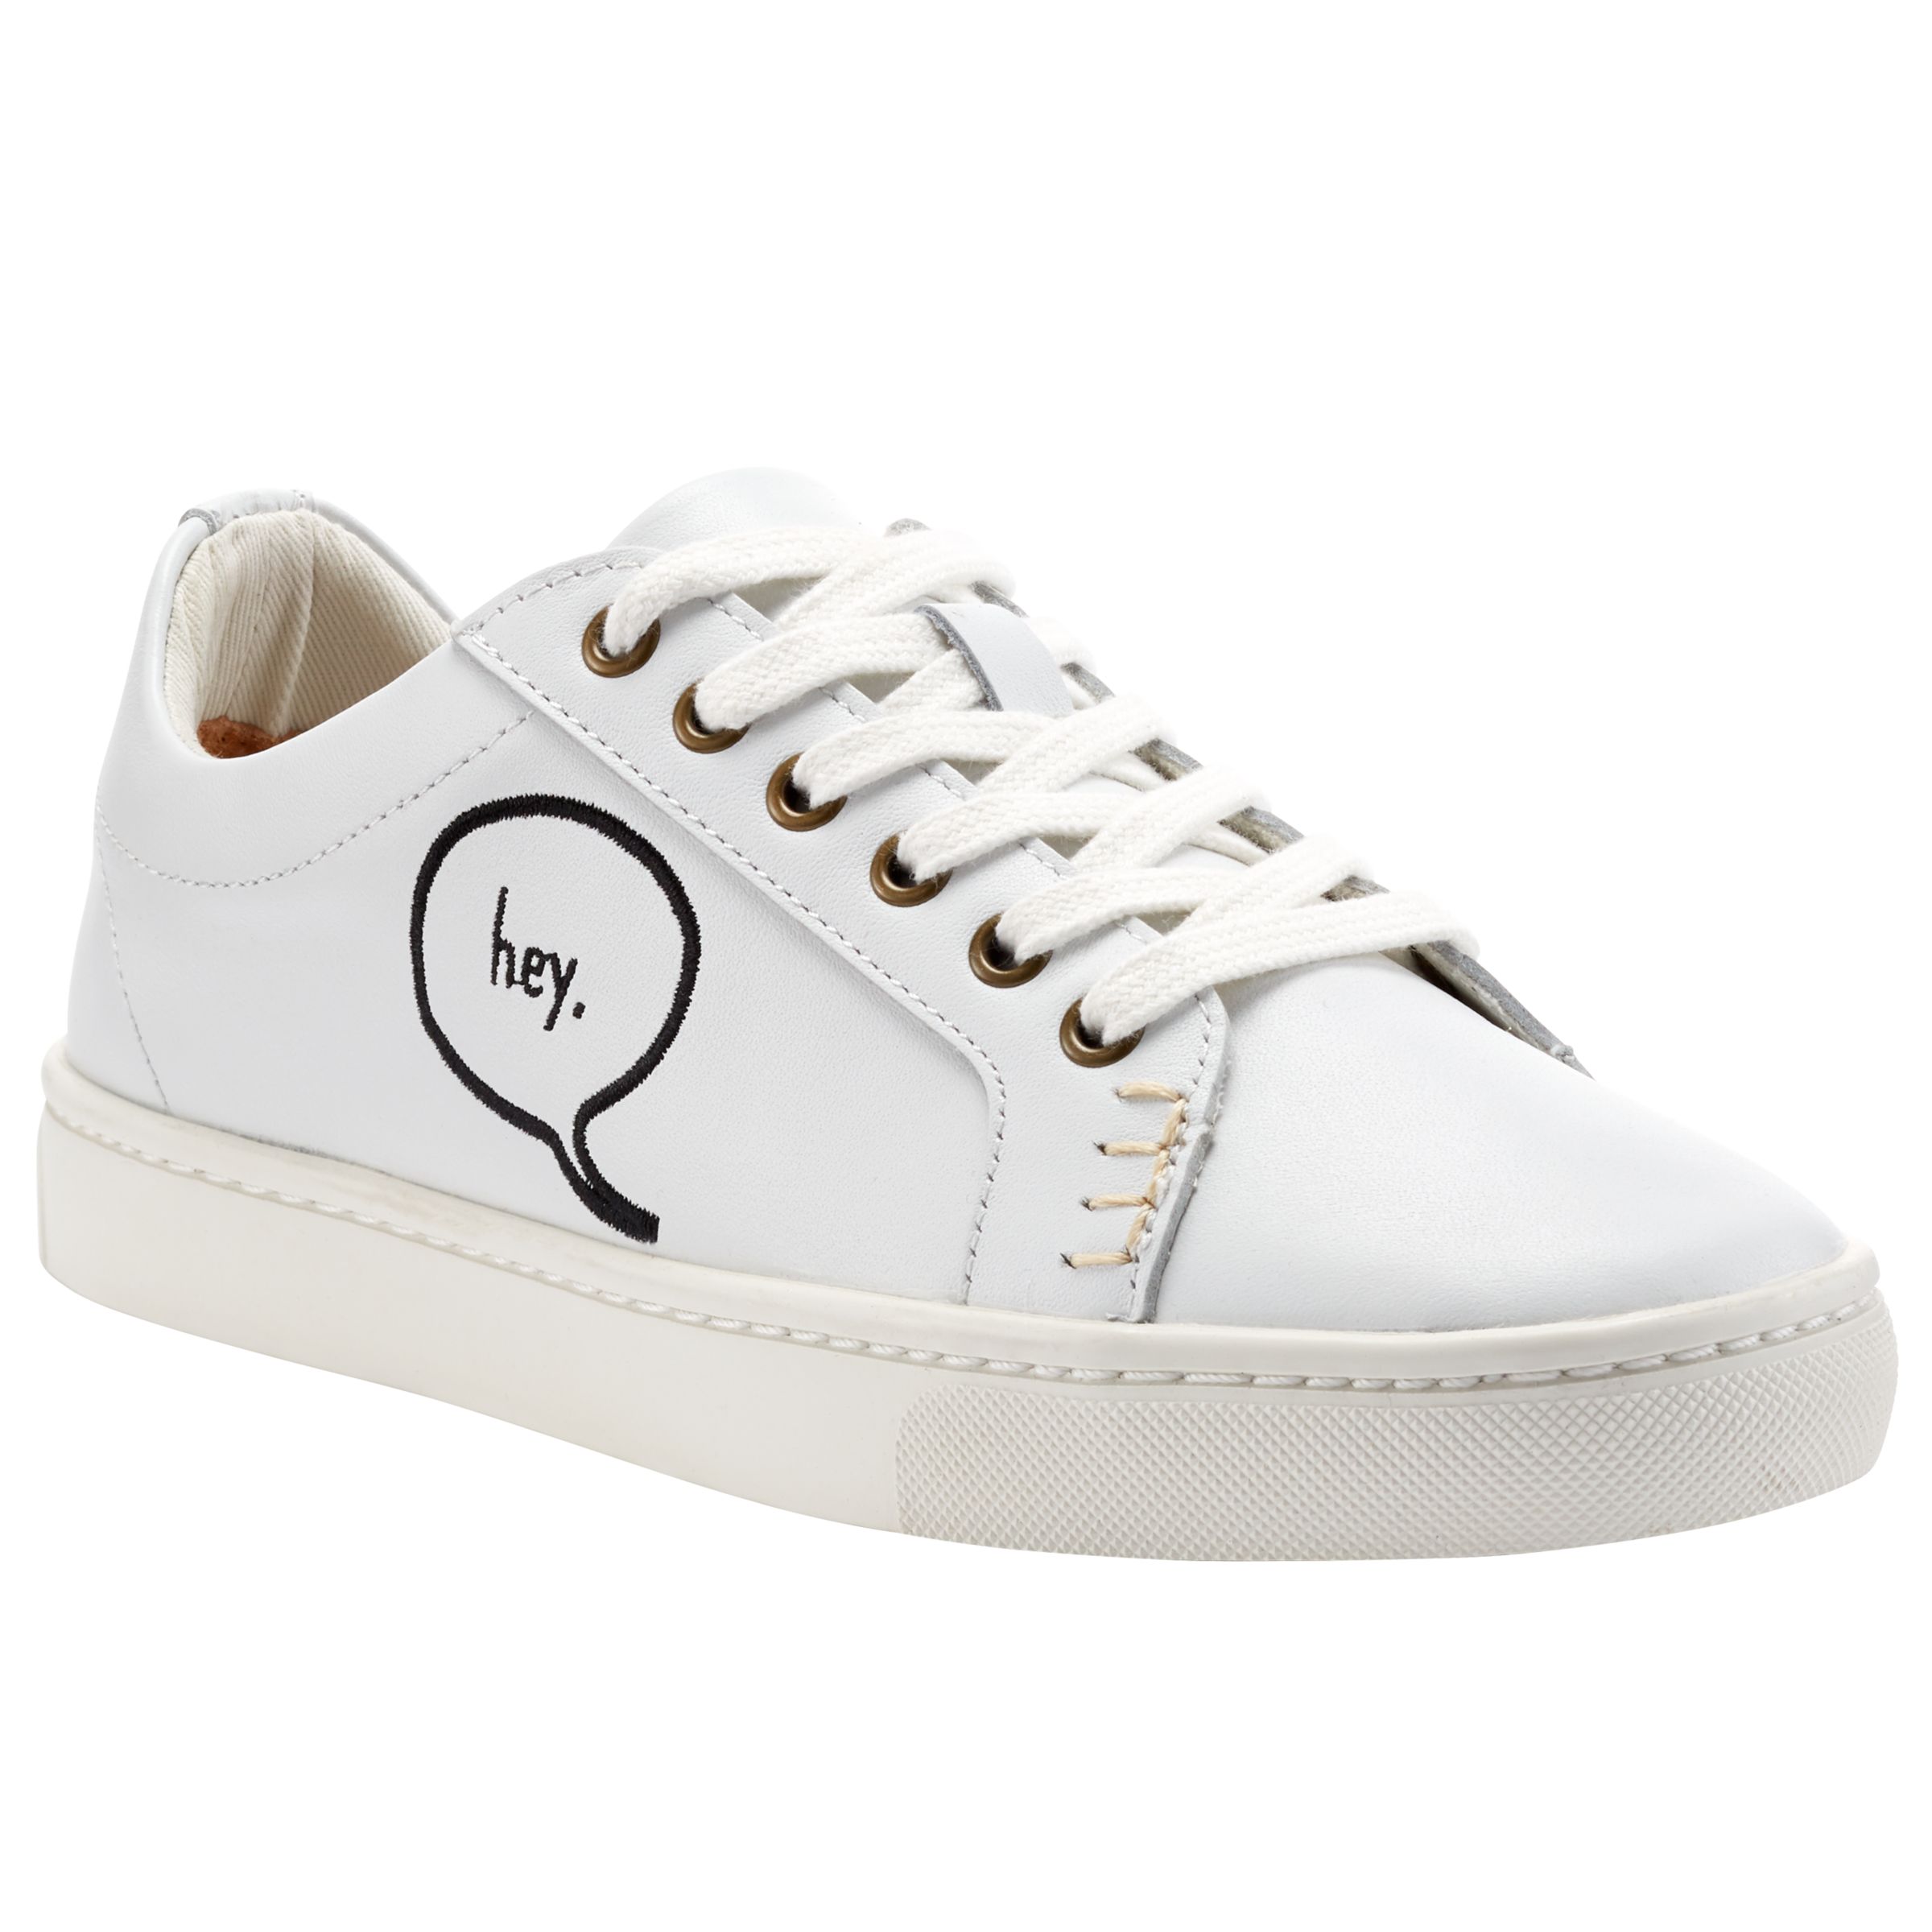 Soludos Embroidered Lace-Up Trainers, White, 8